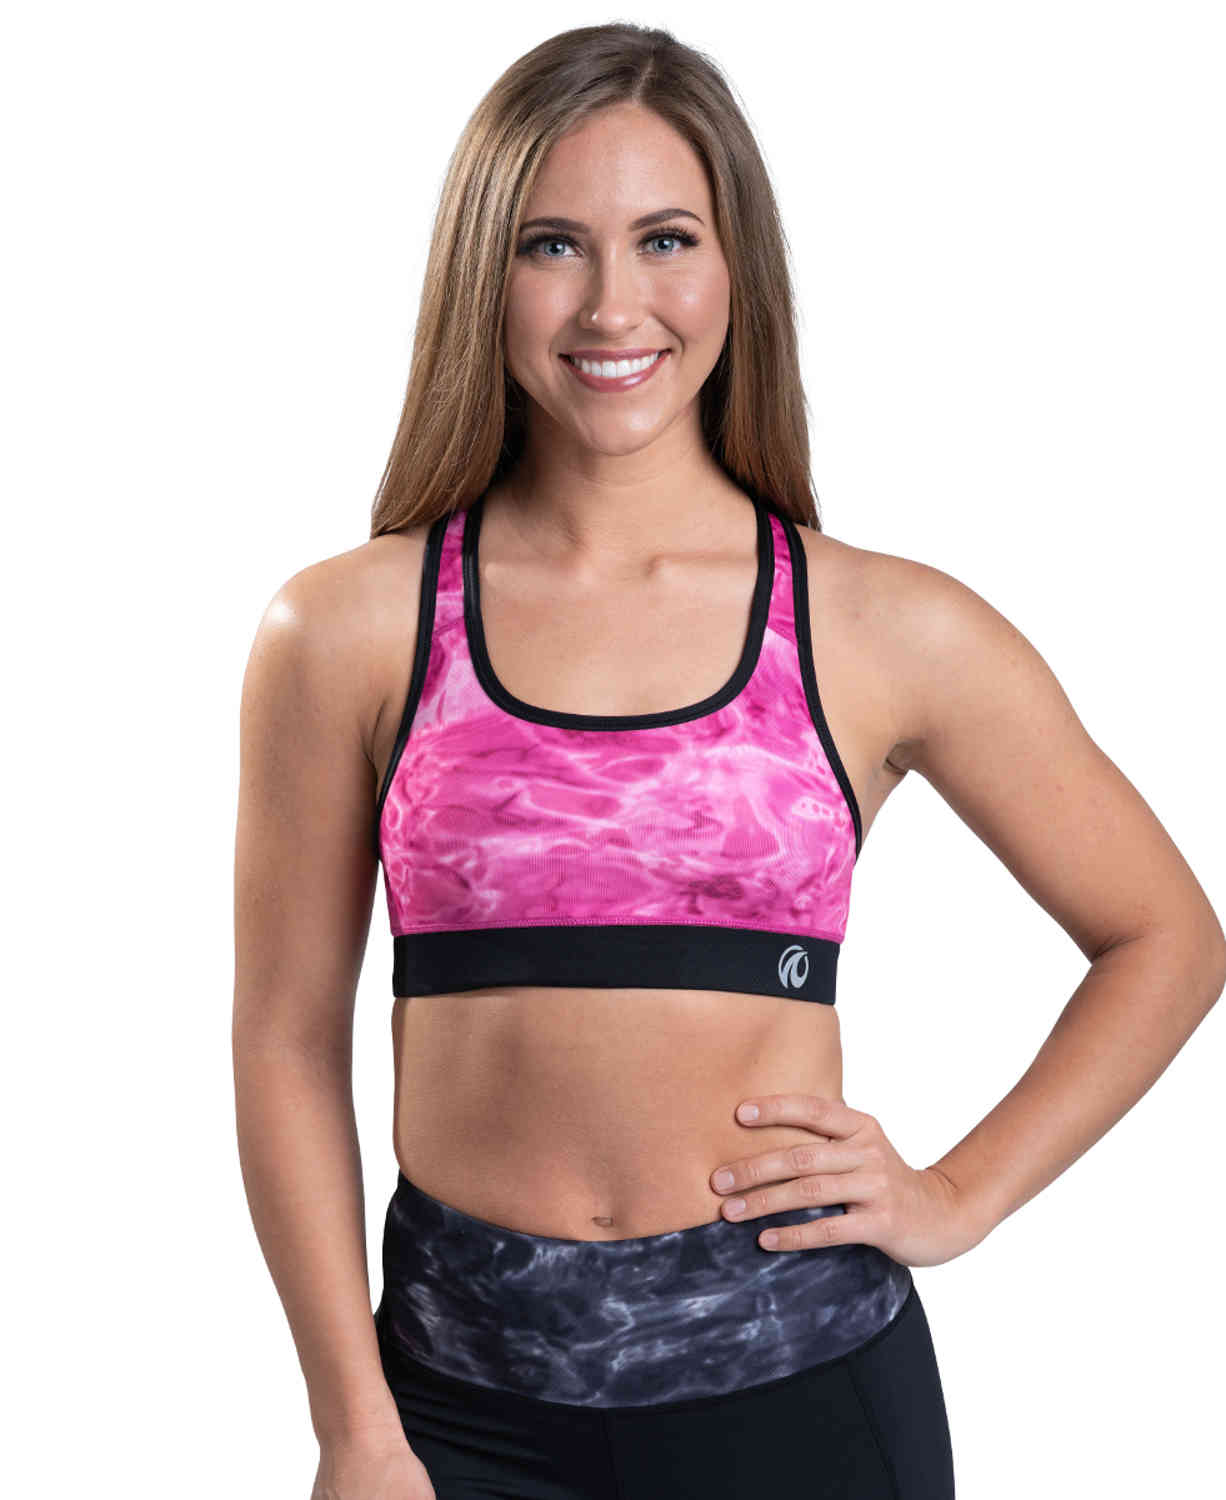 Comfortable and Supportive Sports Bras - Gorilla Wear